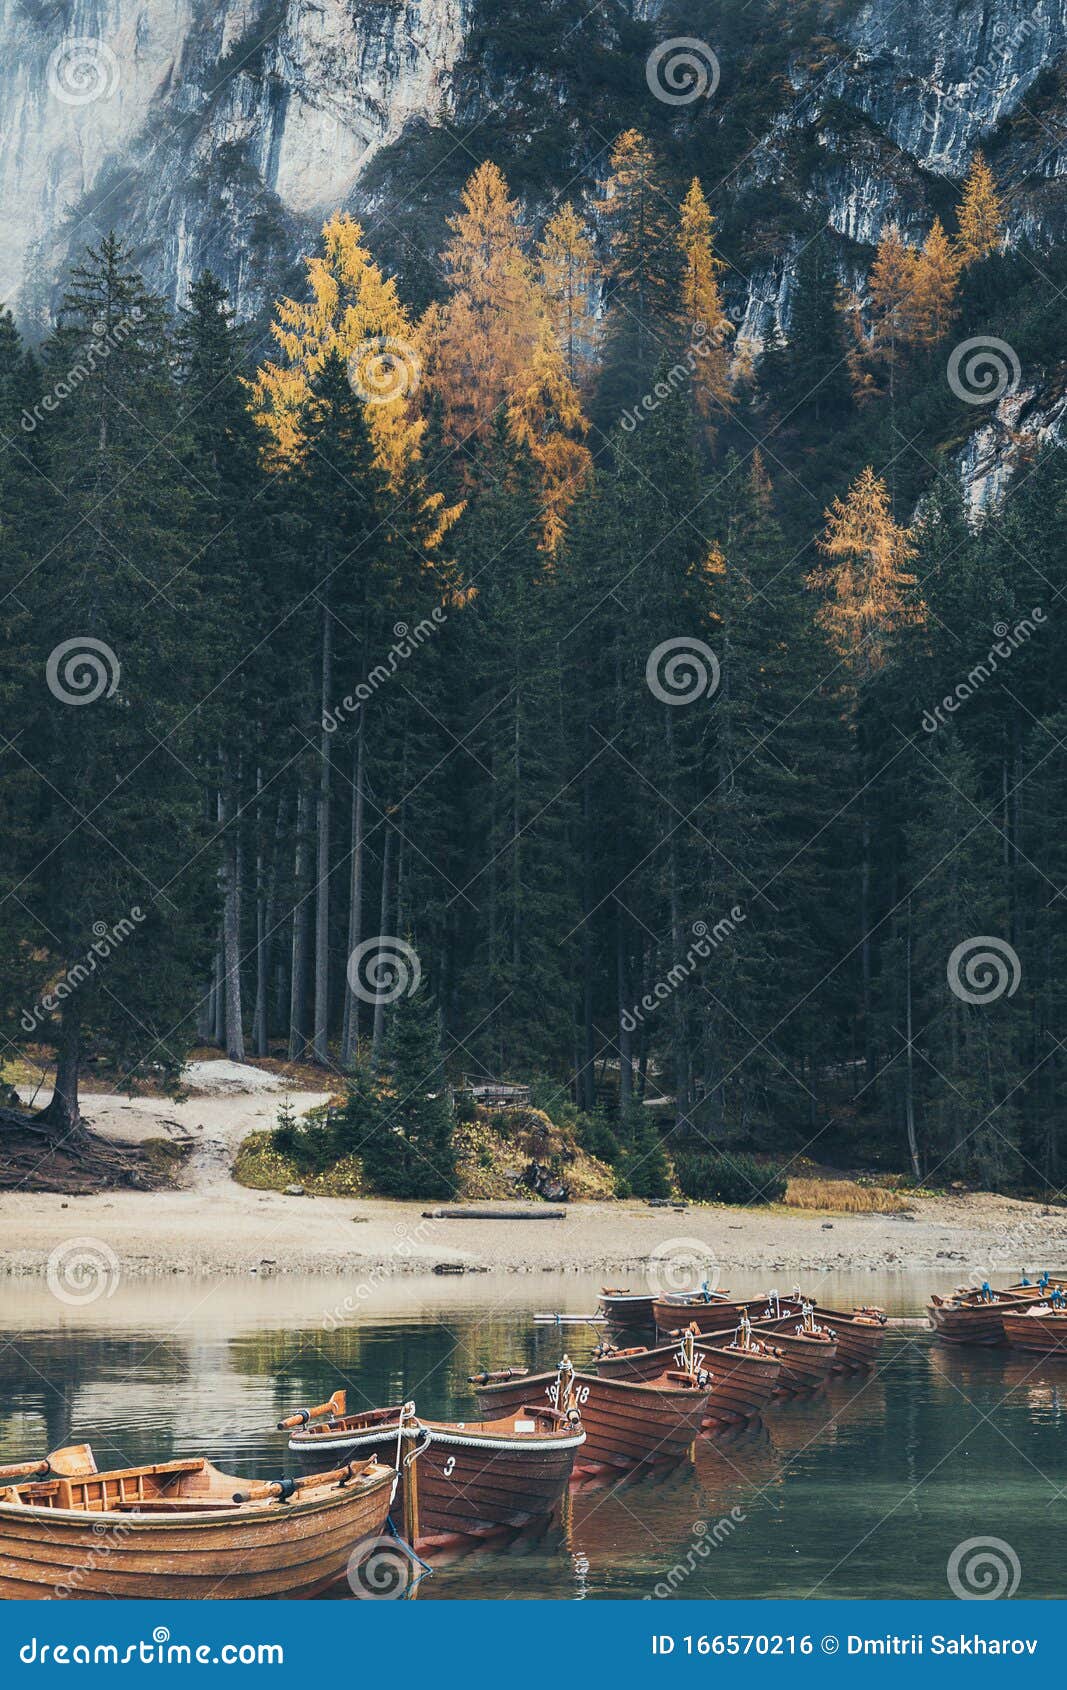 wooden boats on emerald lago di braies lake in dolomites